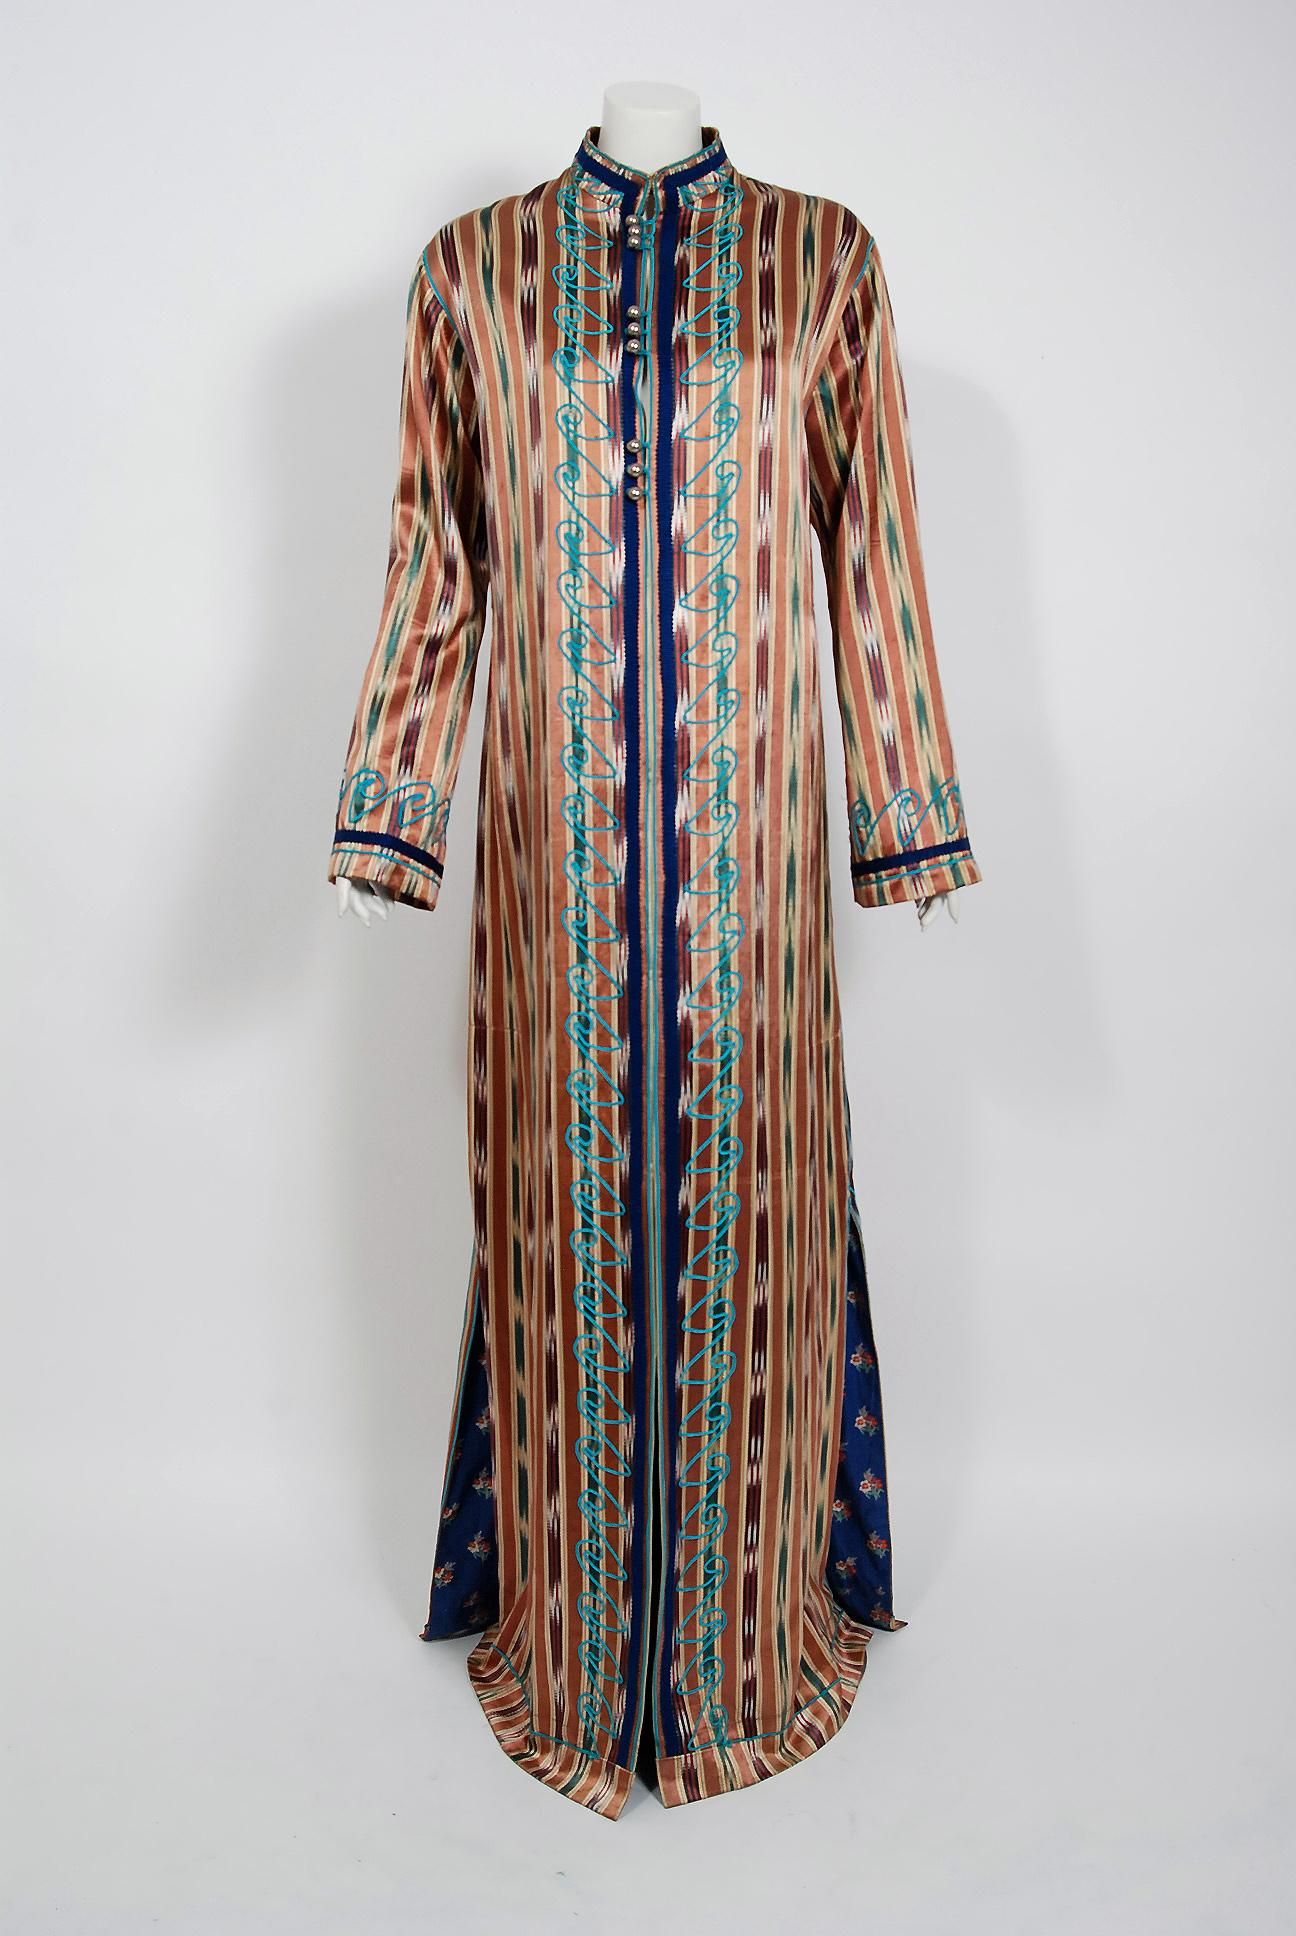 Gorgeous Thea Porter Couture full-length bohemian jacket dating back to the early 1970's. This rare garment is fashioned in the most beautiful mid-weight bronze and blue ikat-print silk; lined in a floral cotton which somehow works flawlessly. I